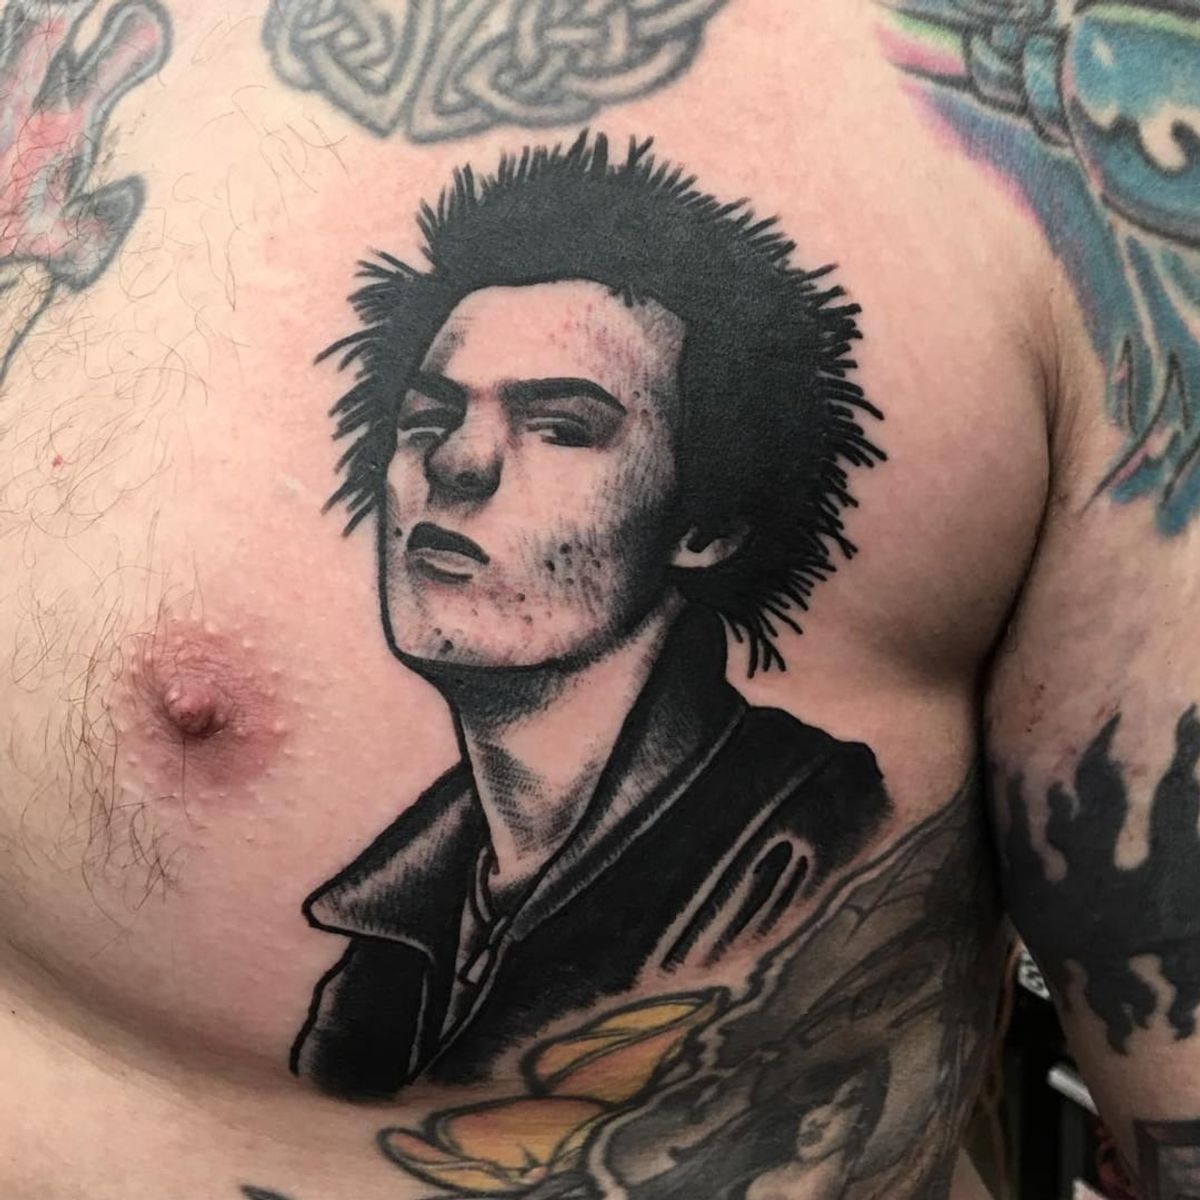 Tattoo Uploaded By Ross Howerton • A Blackwork Portrait Of Sid Vicious